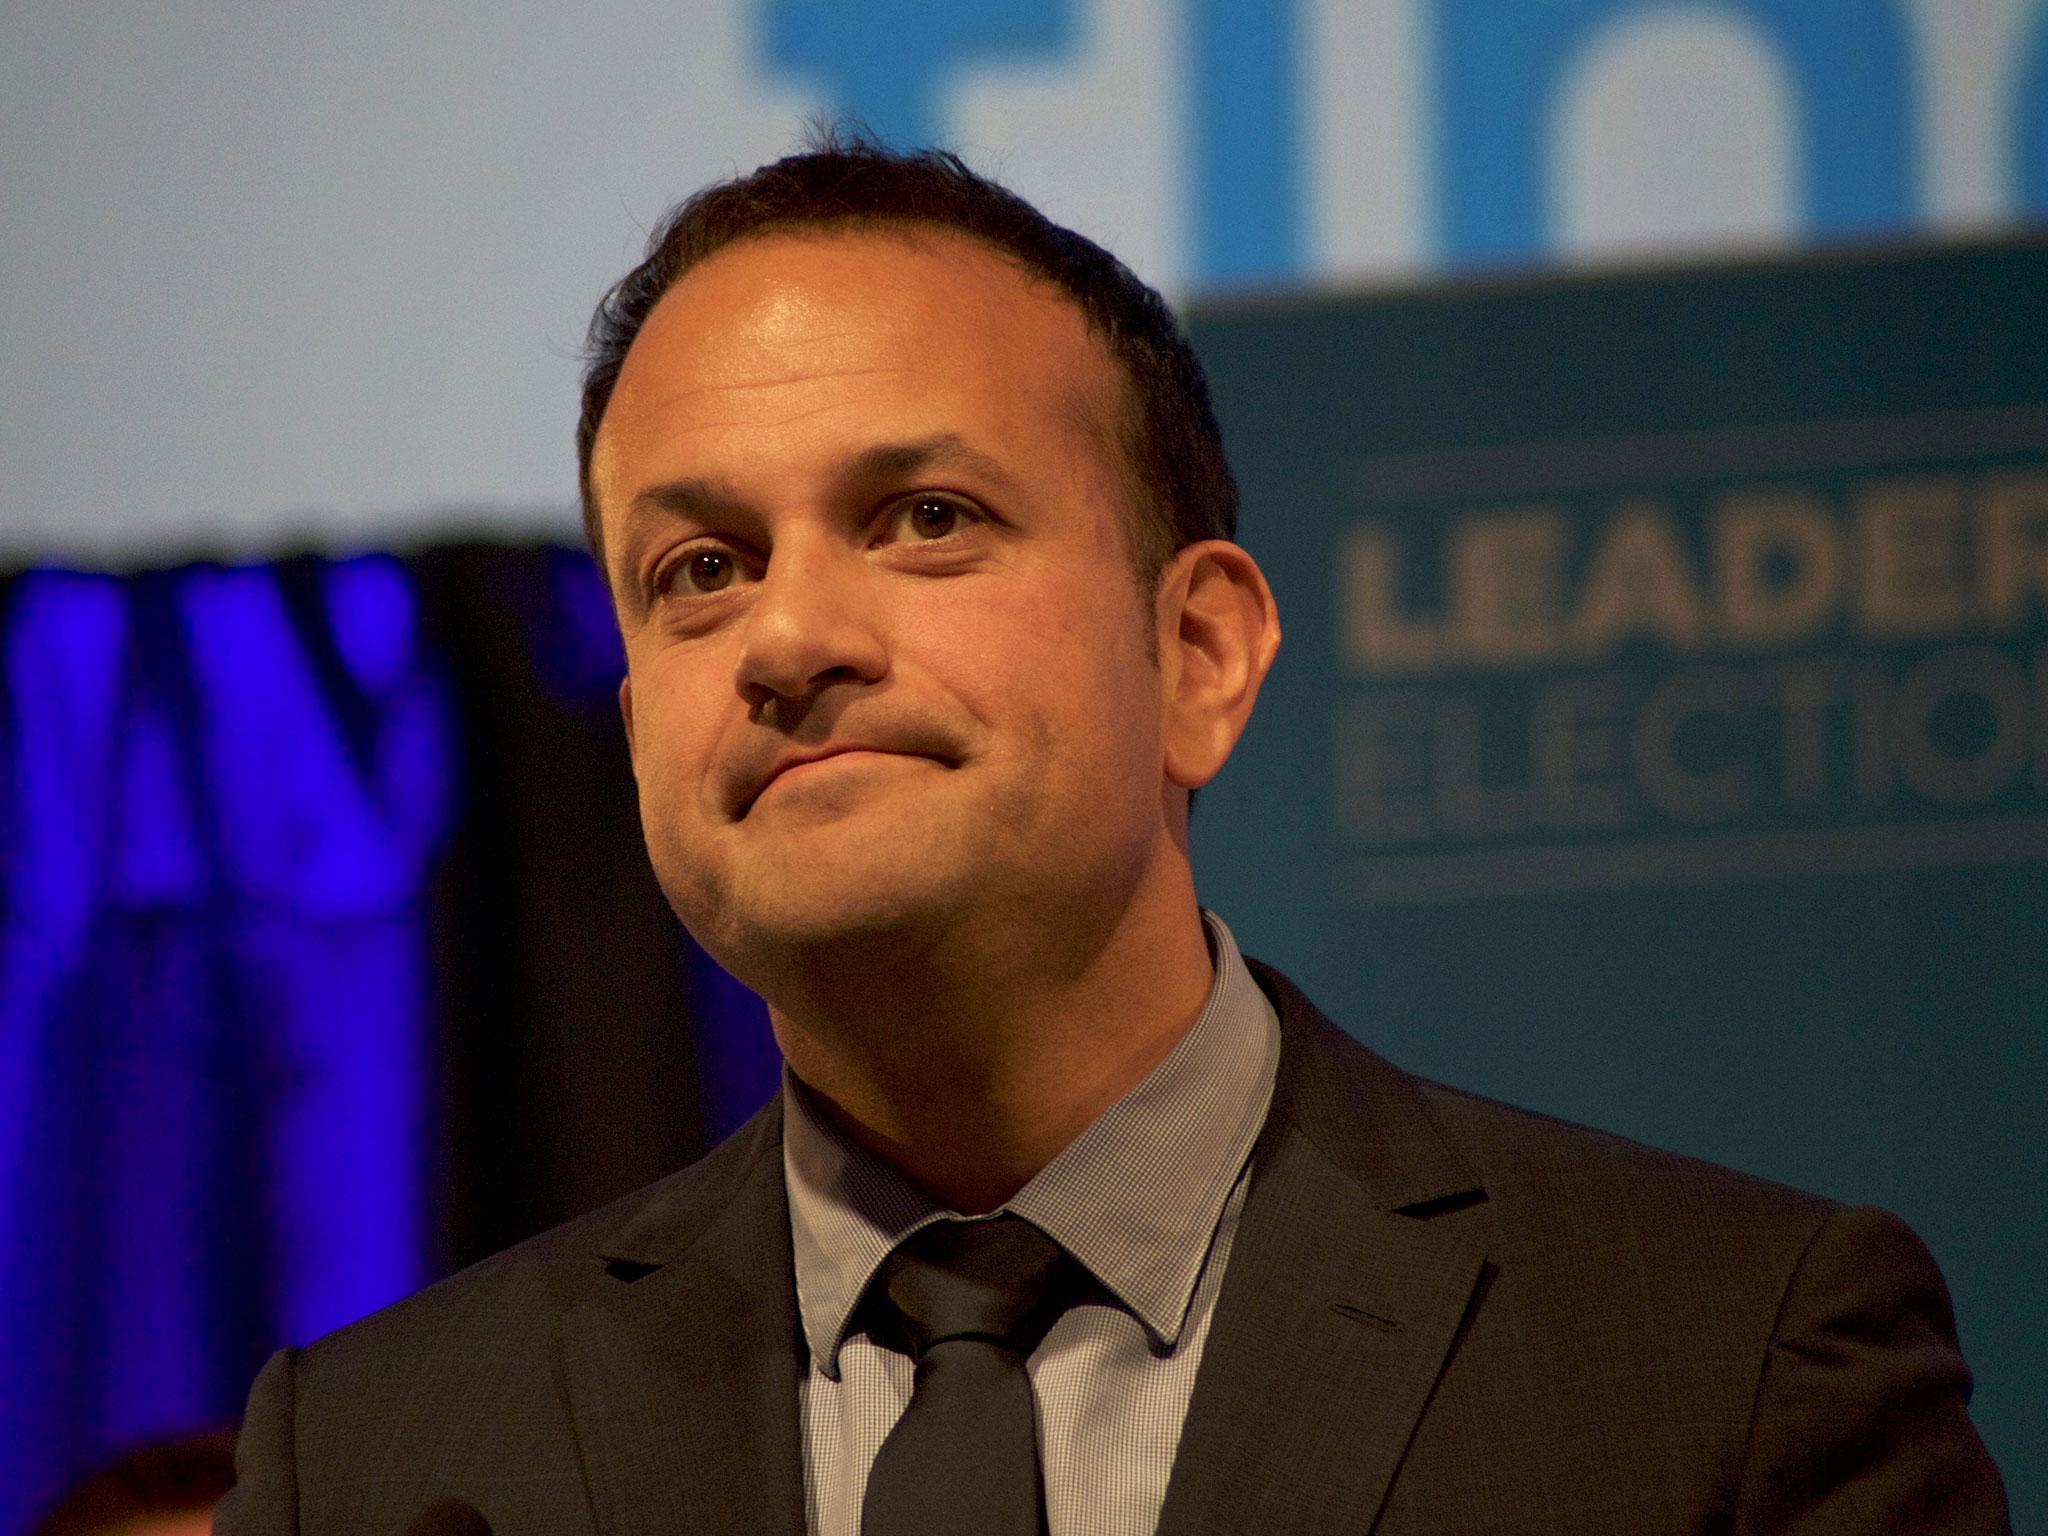 Leo Varadkar won 57 votes in the Irish parliament against 50, with 45 abstentions